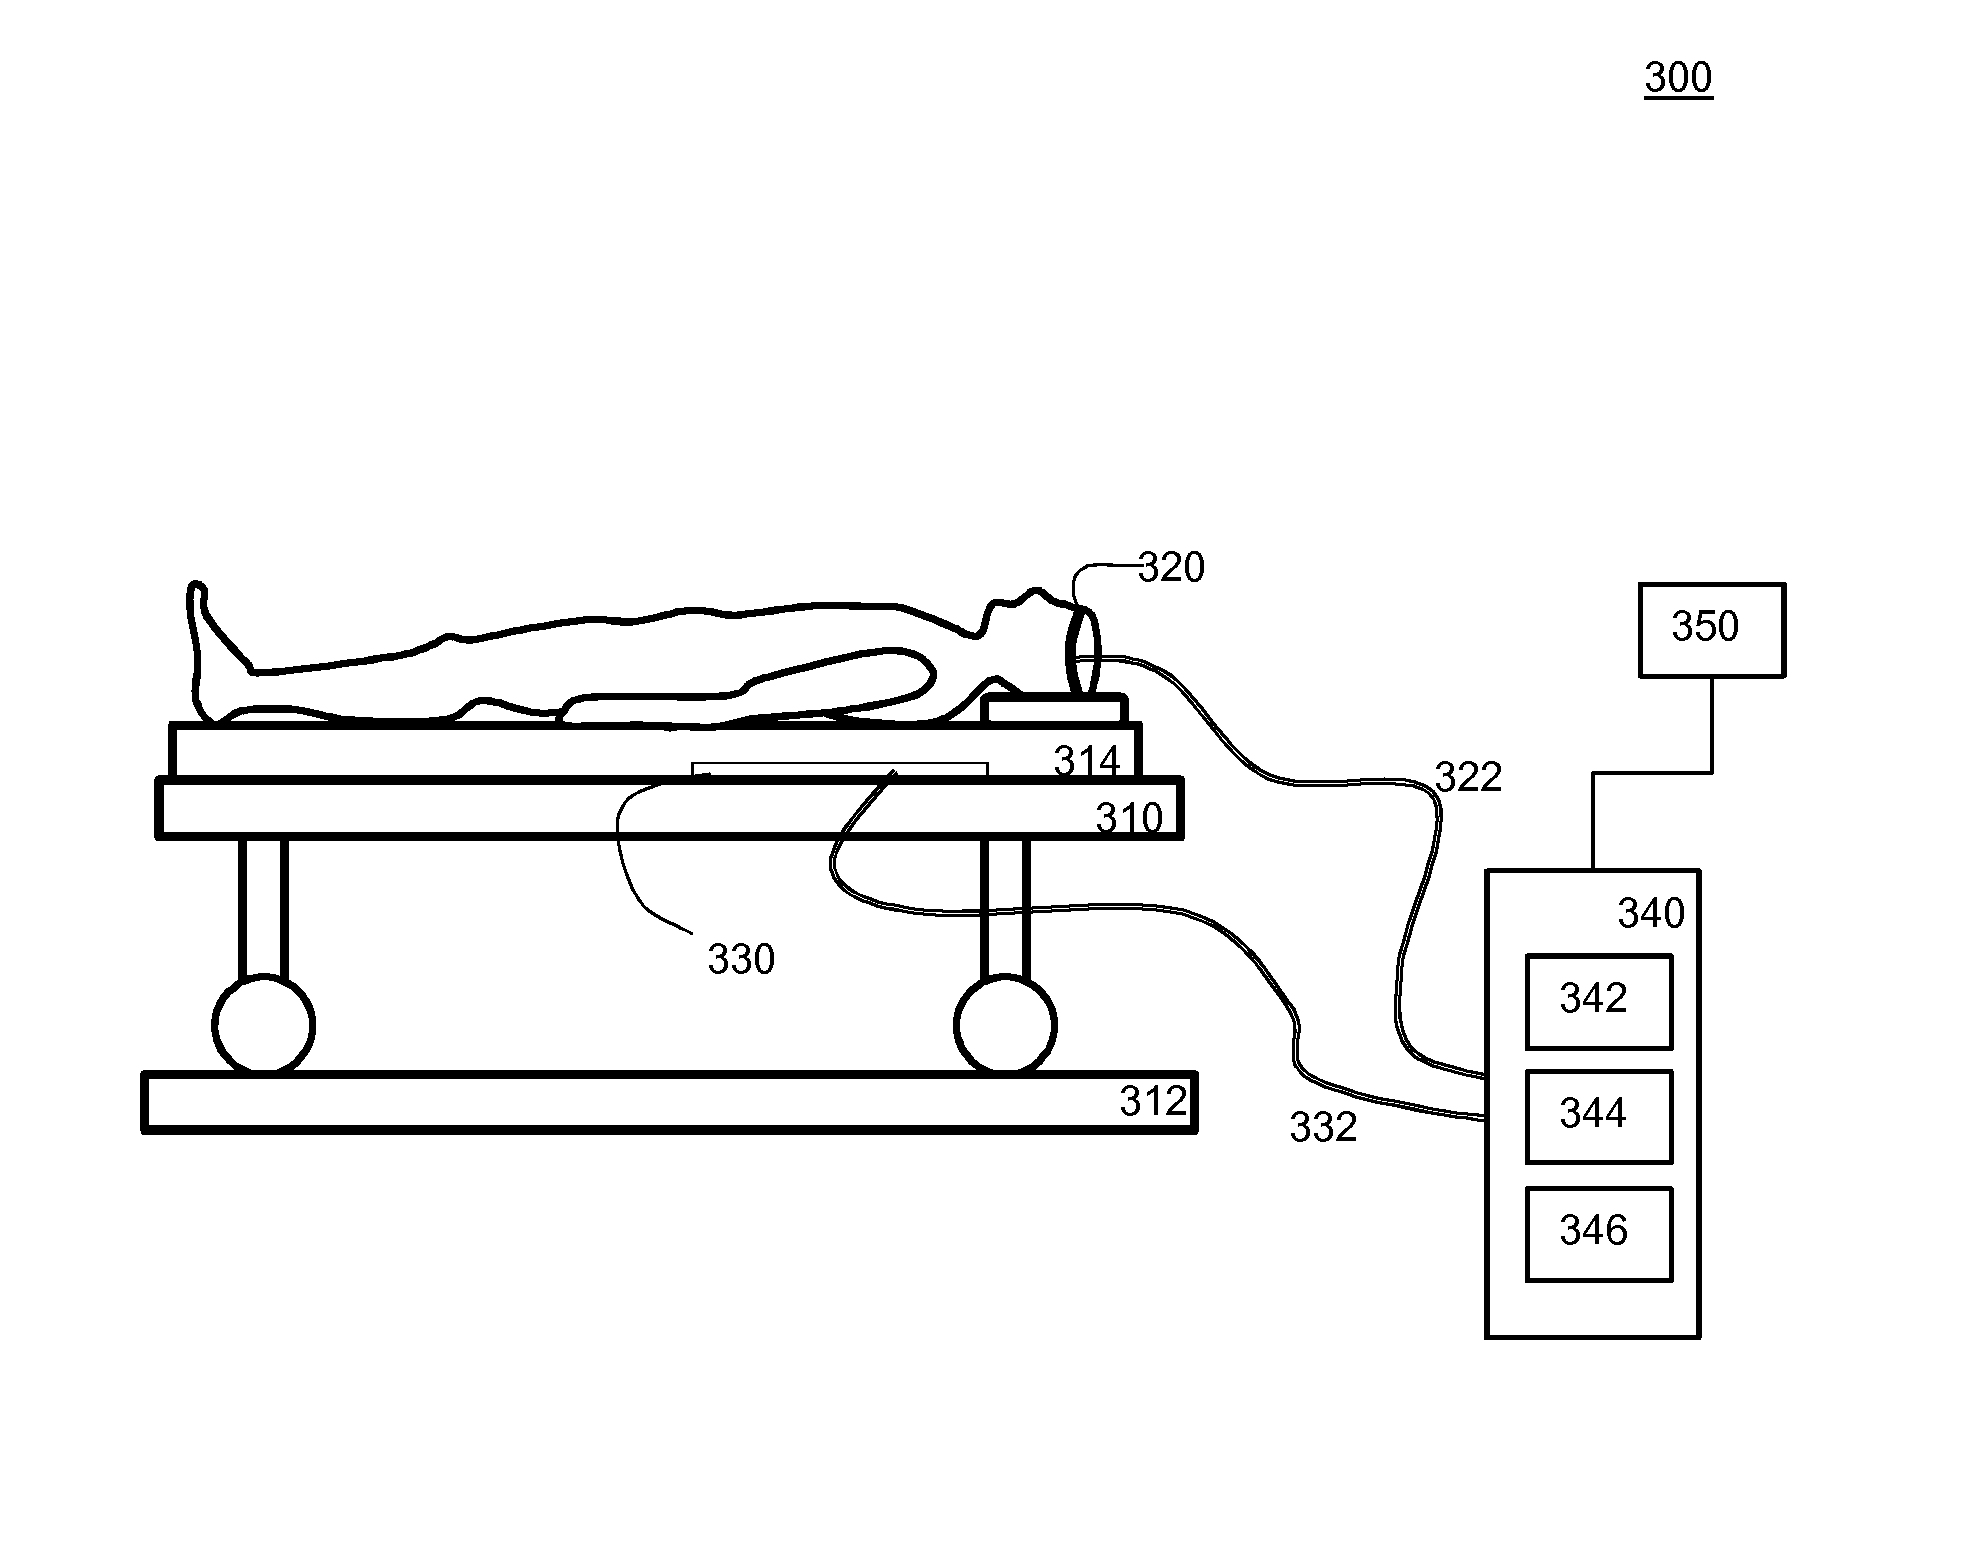 Electronic switch for controlling a device in dependency on a sleep stage